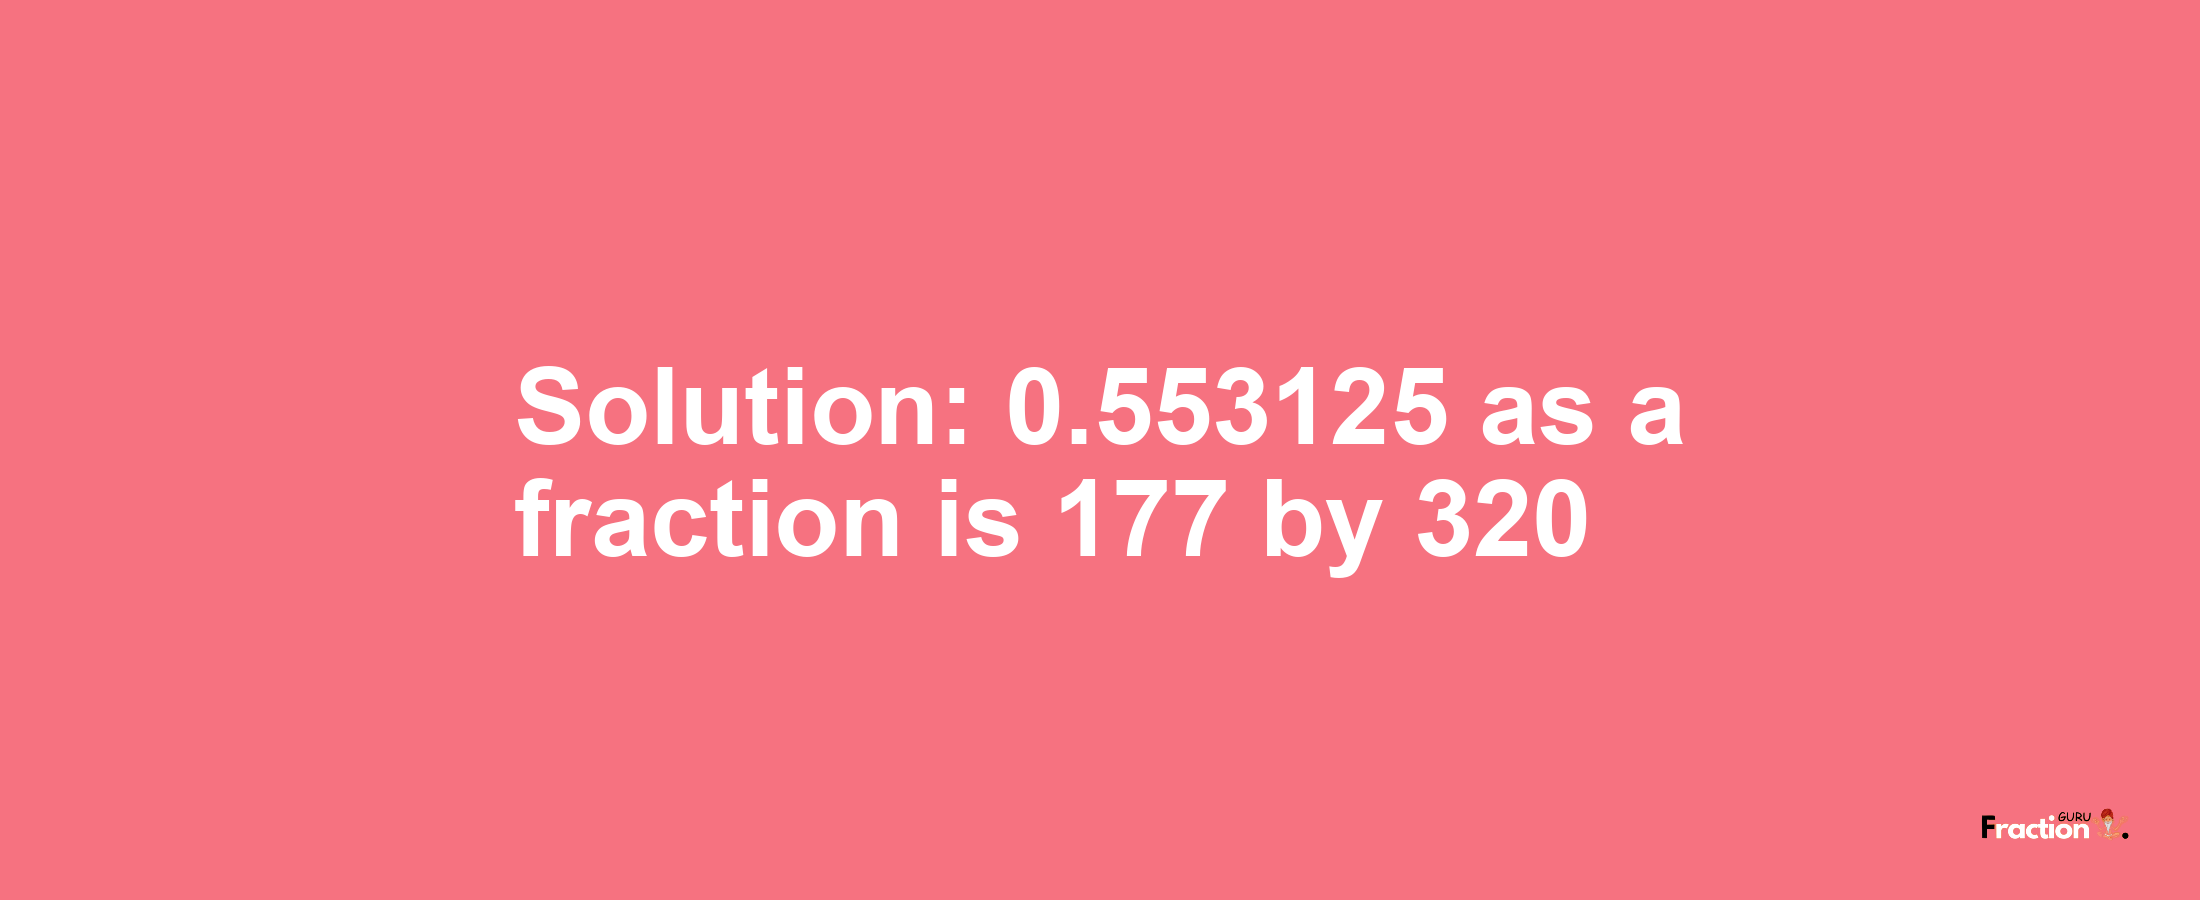 Solution:0.553125 as a fraction is 177/320